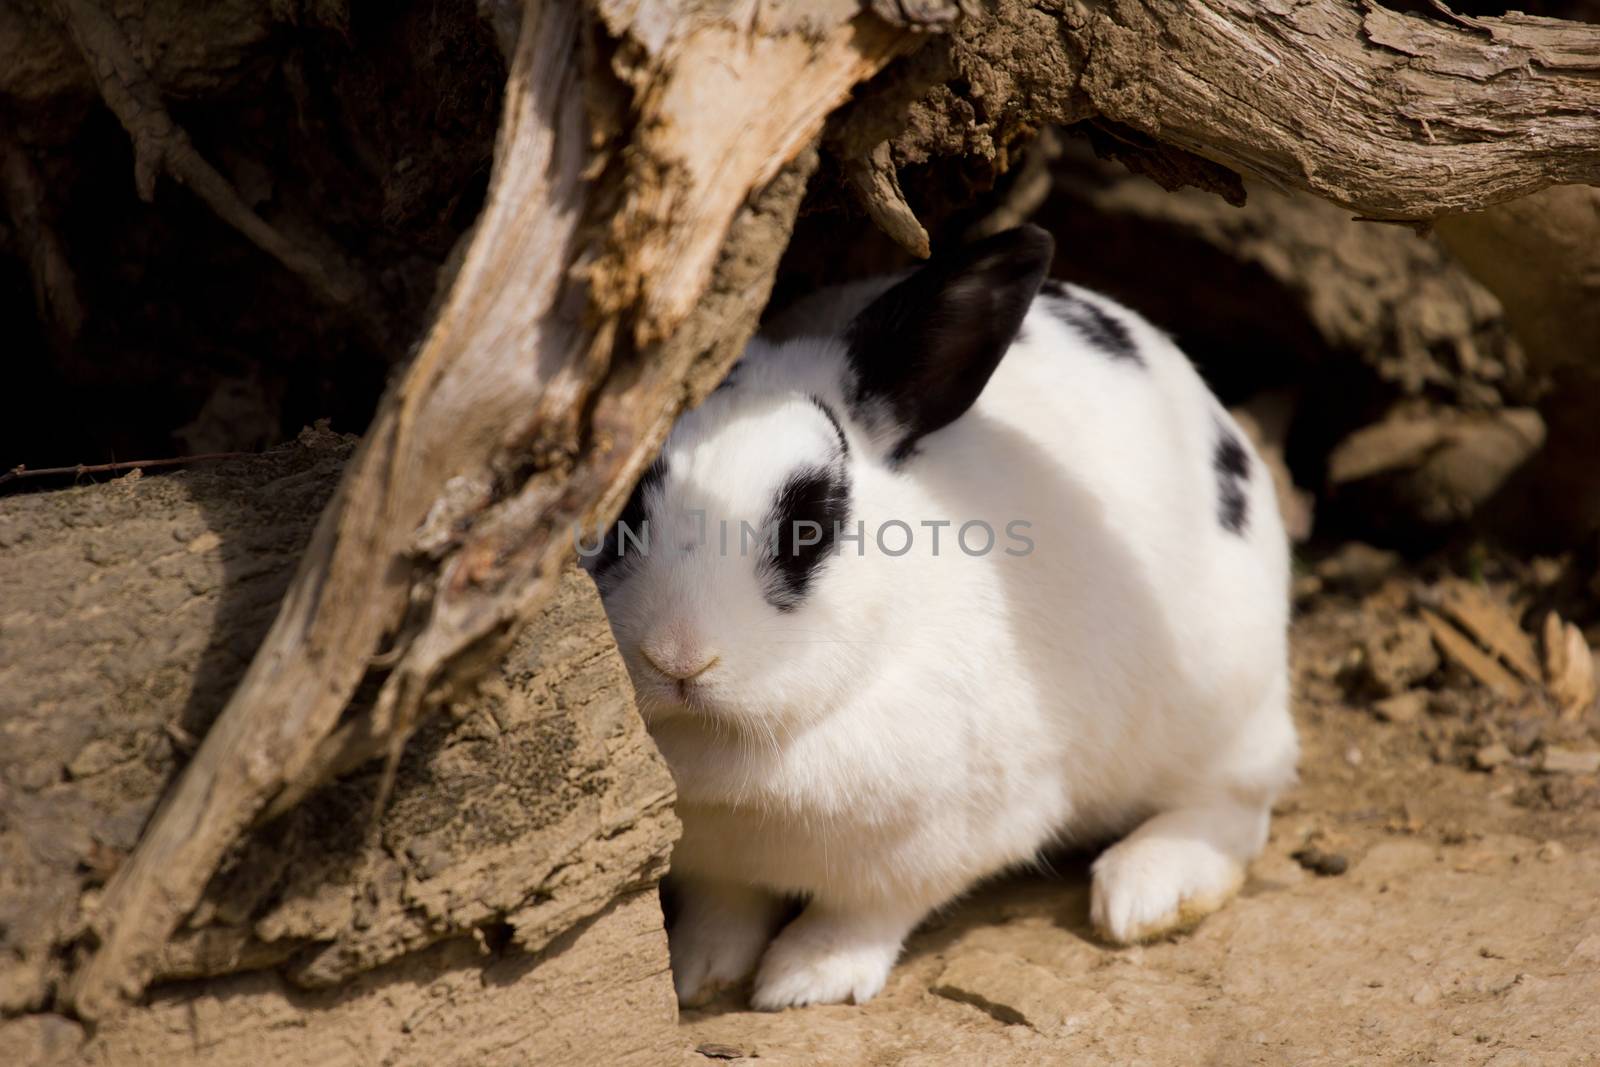 Rabbit coming out of hiding by gwolters